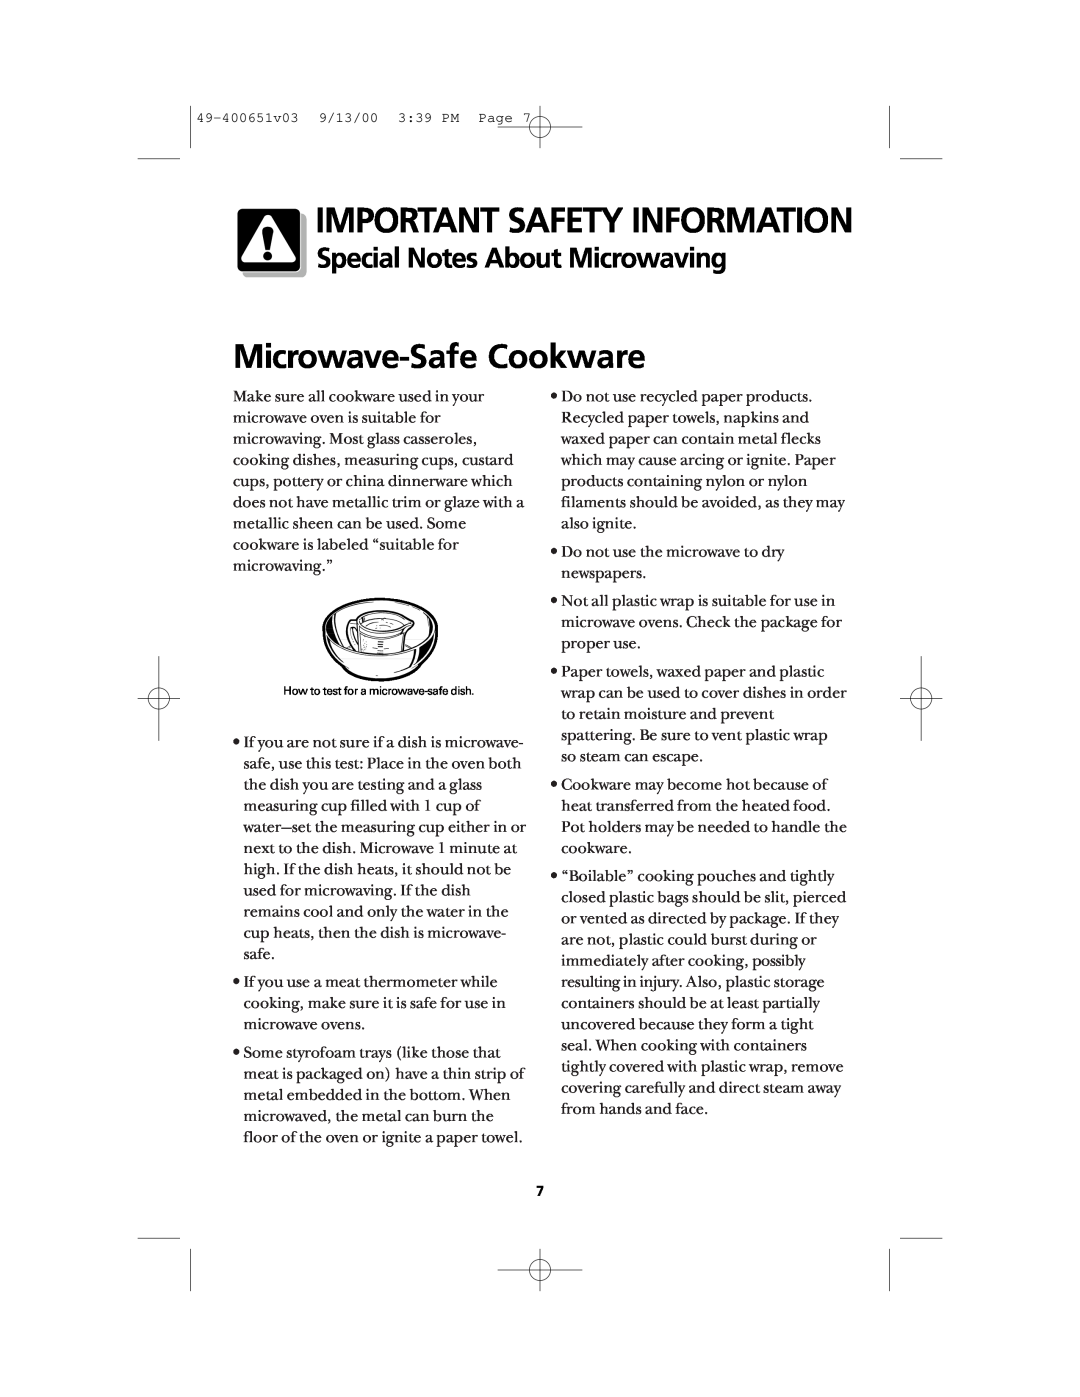 Frigidaire FMT148 warranty Microwave-Safe Cookware, Important Safety Information, Special Notes About Microwaving 